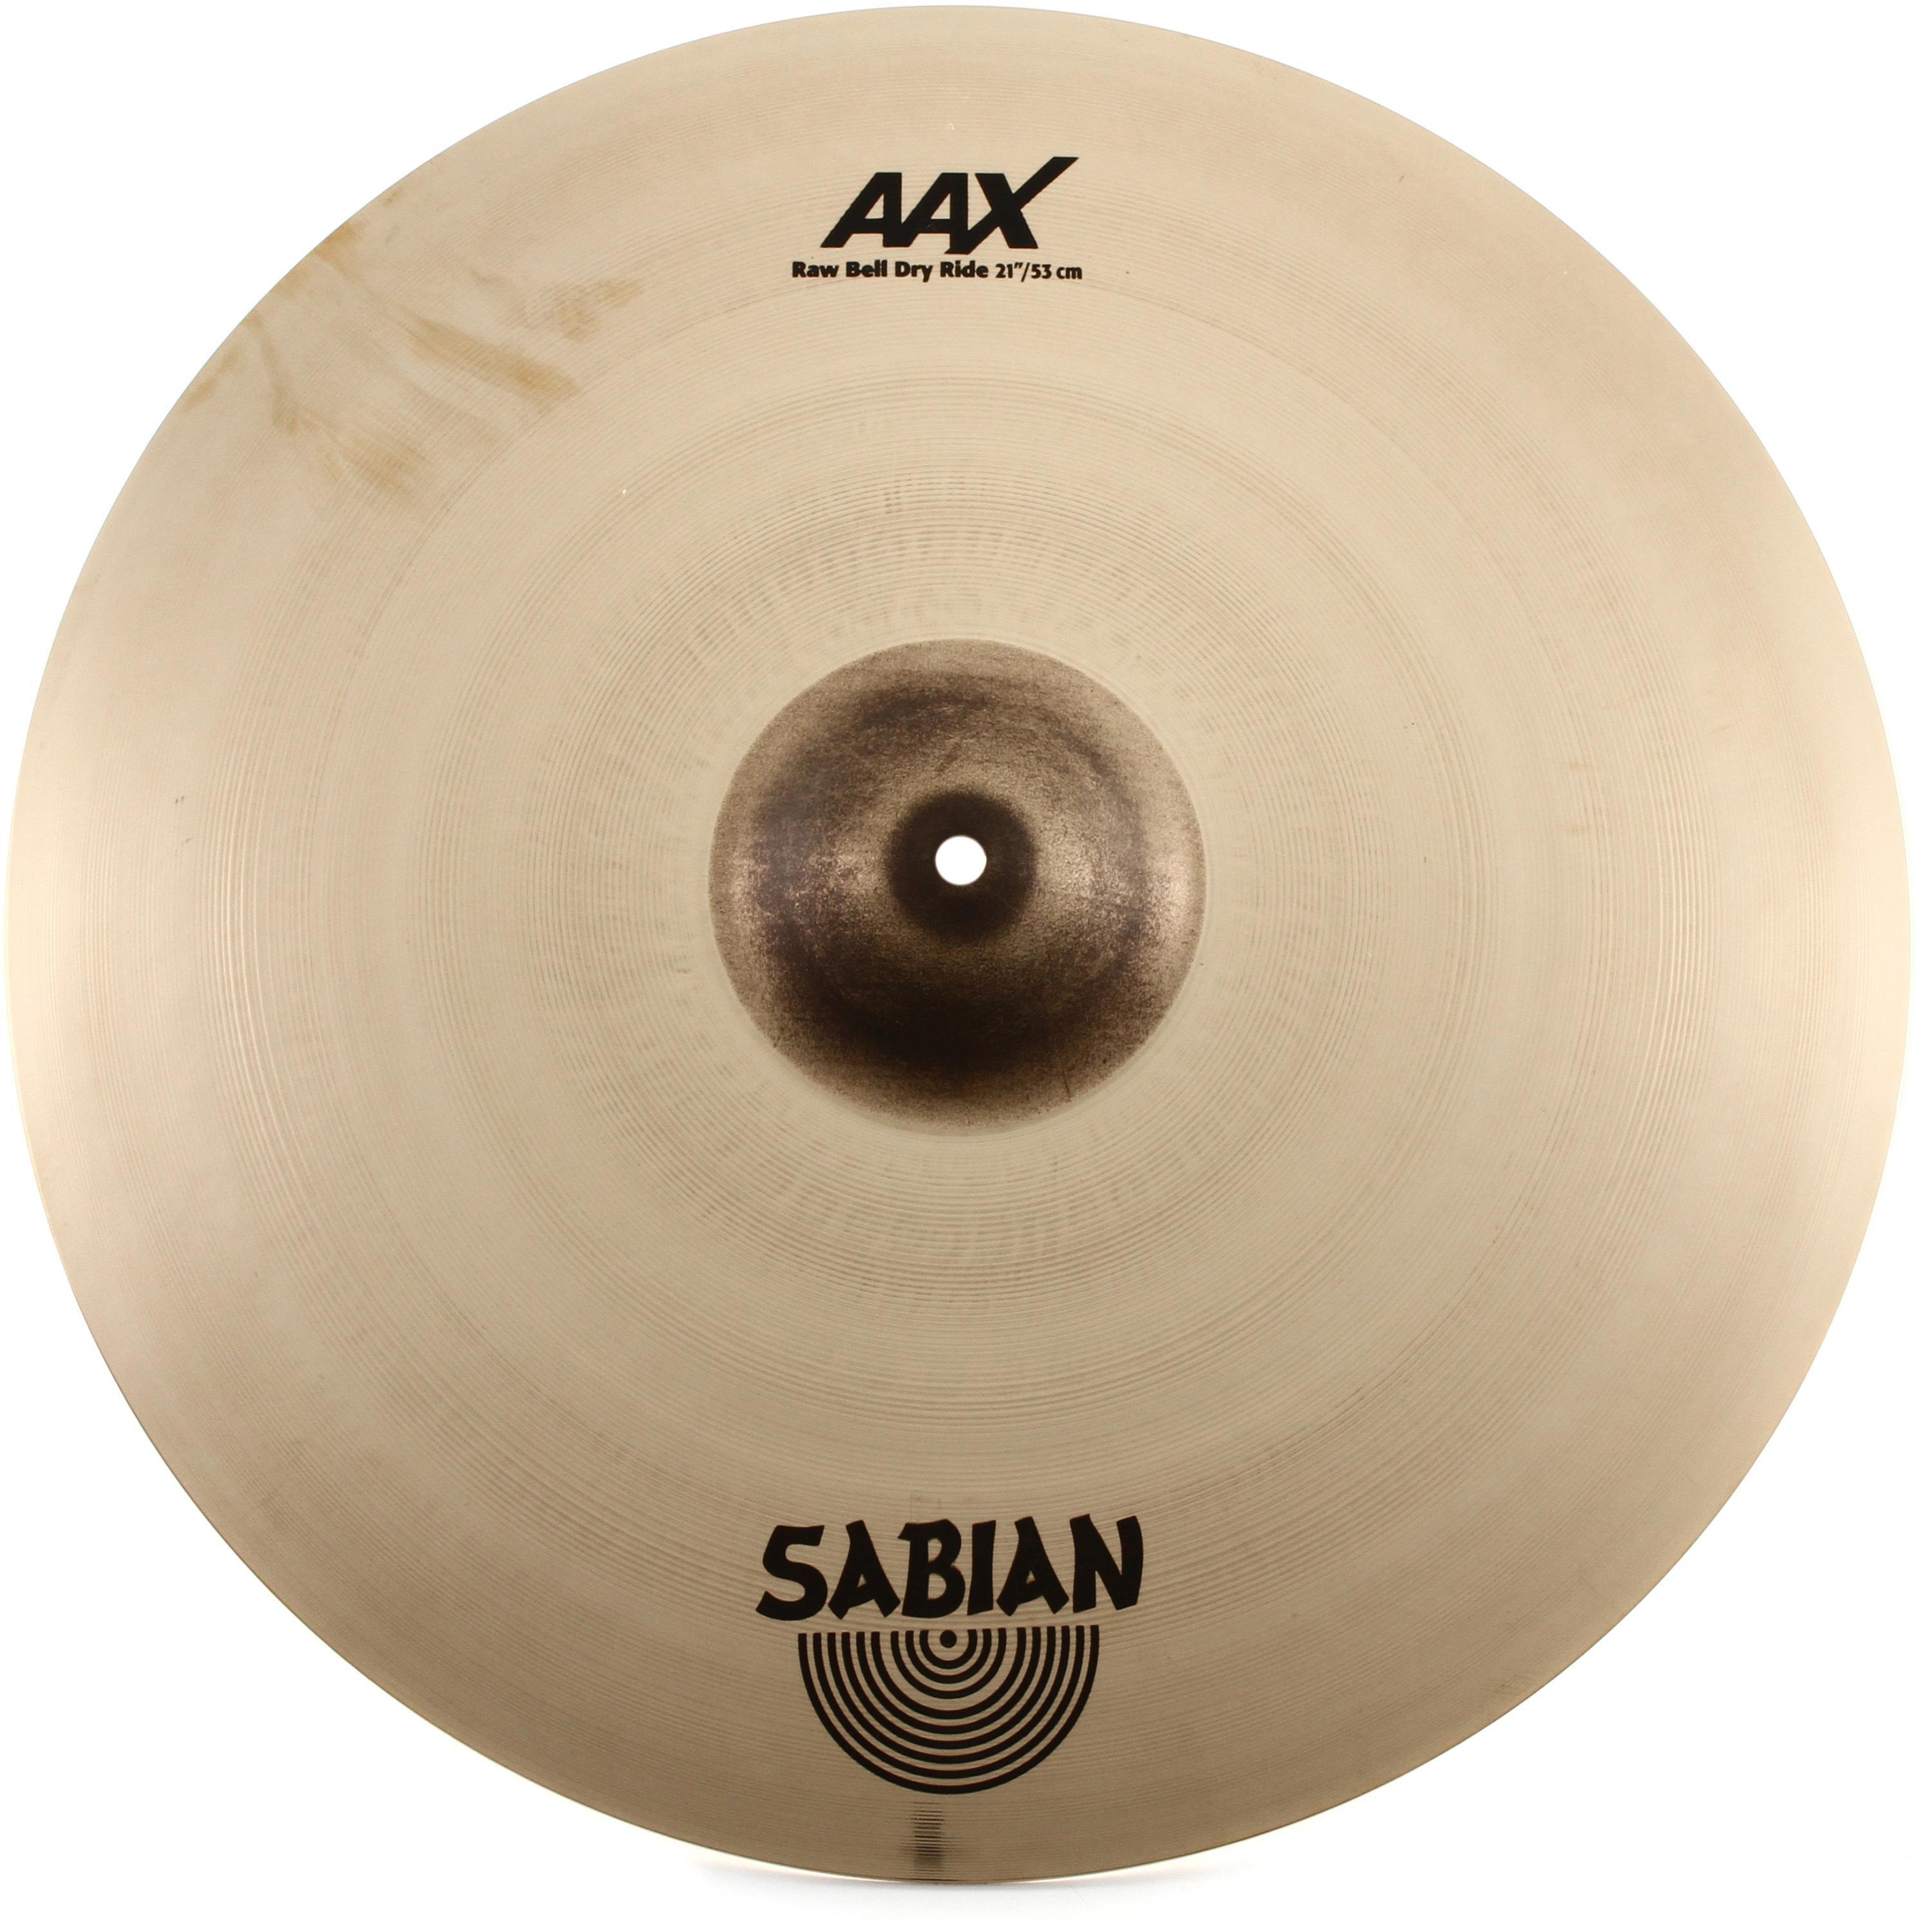 21 inch AAX Raw Bell Dry Ride Cymbal - Brilliant Finish - Sweetwater